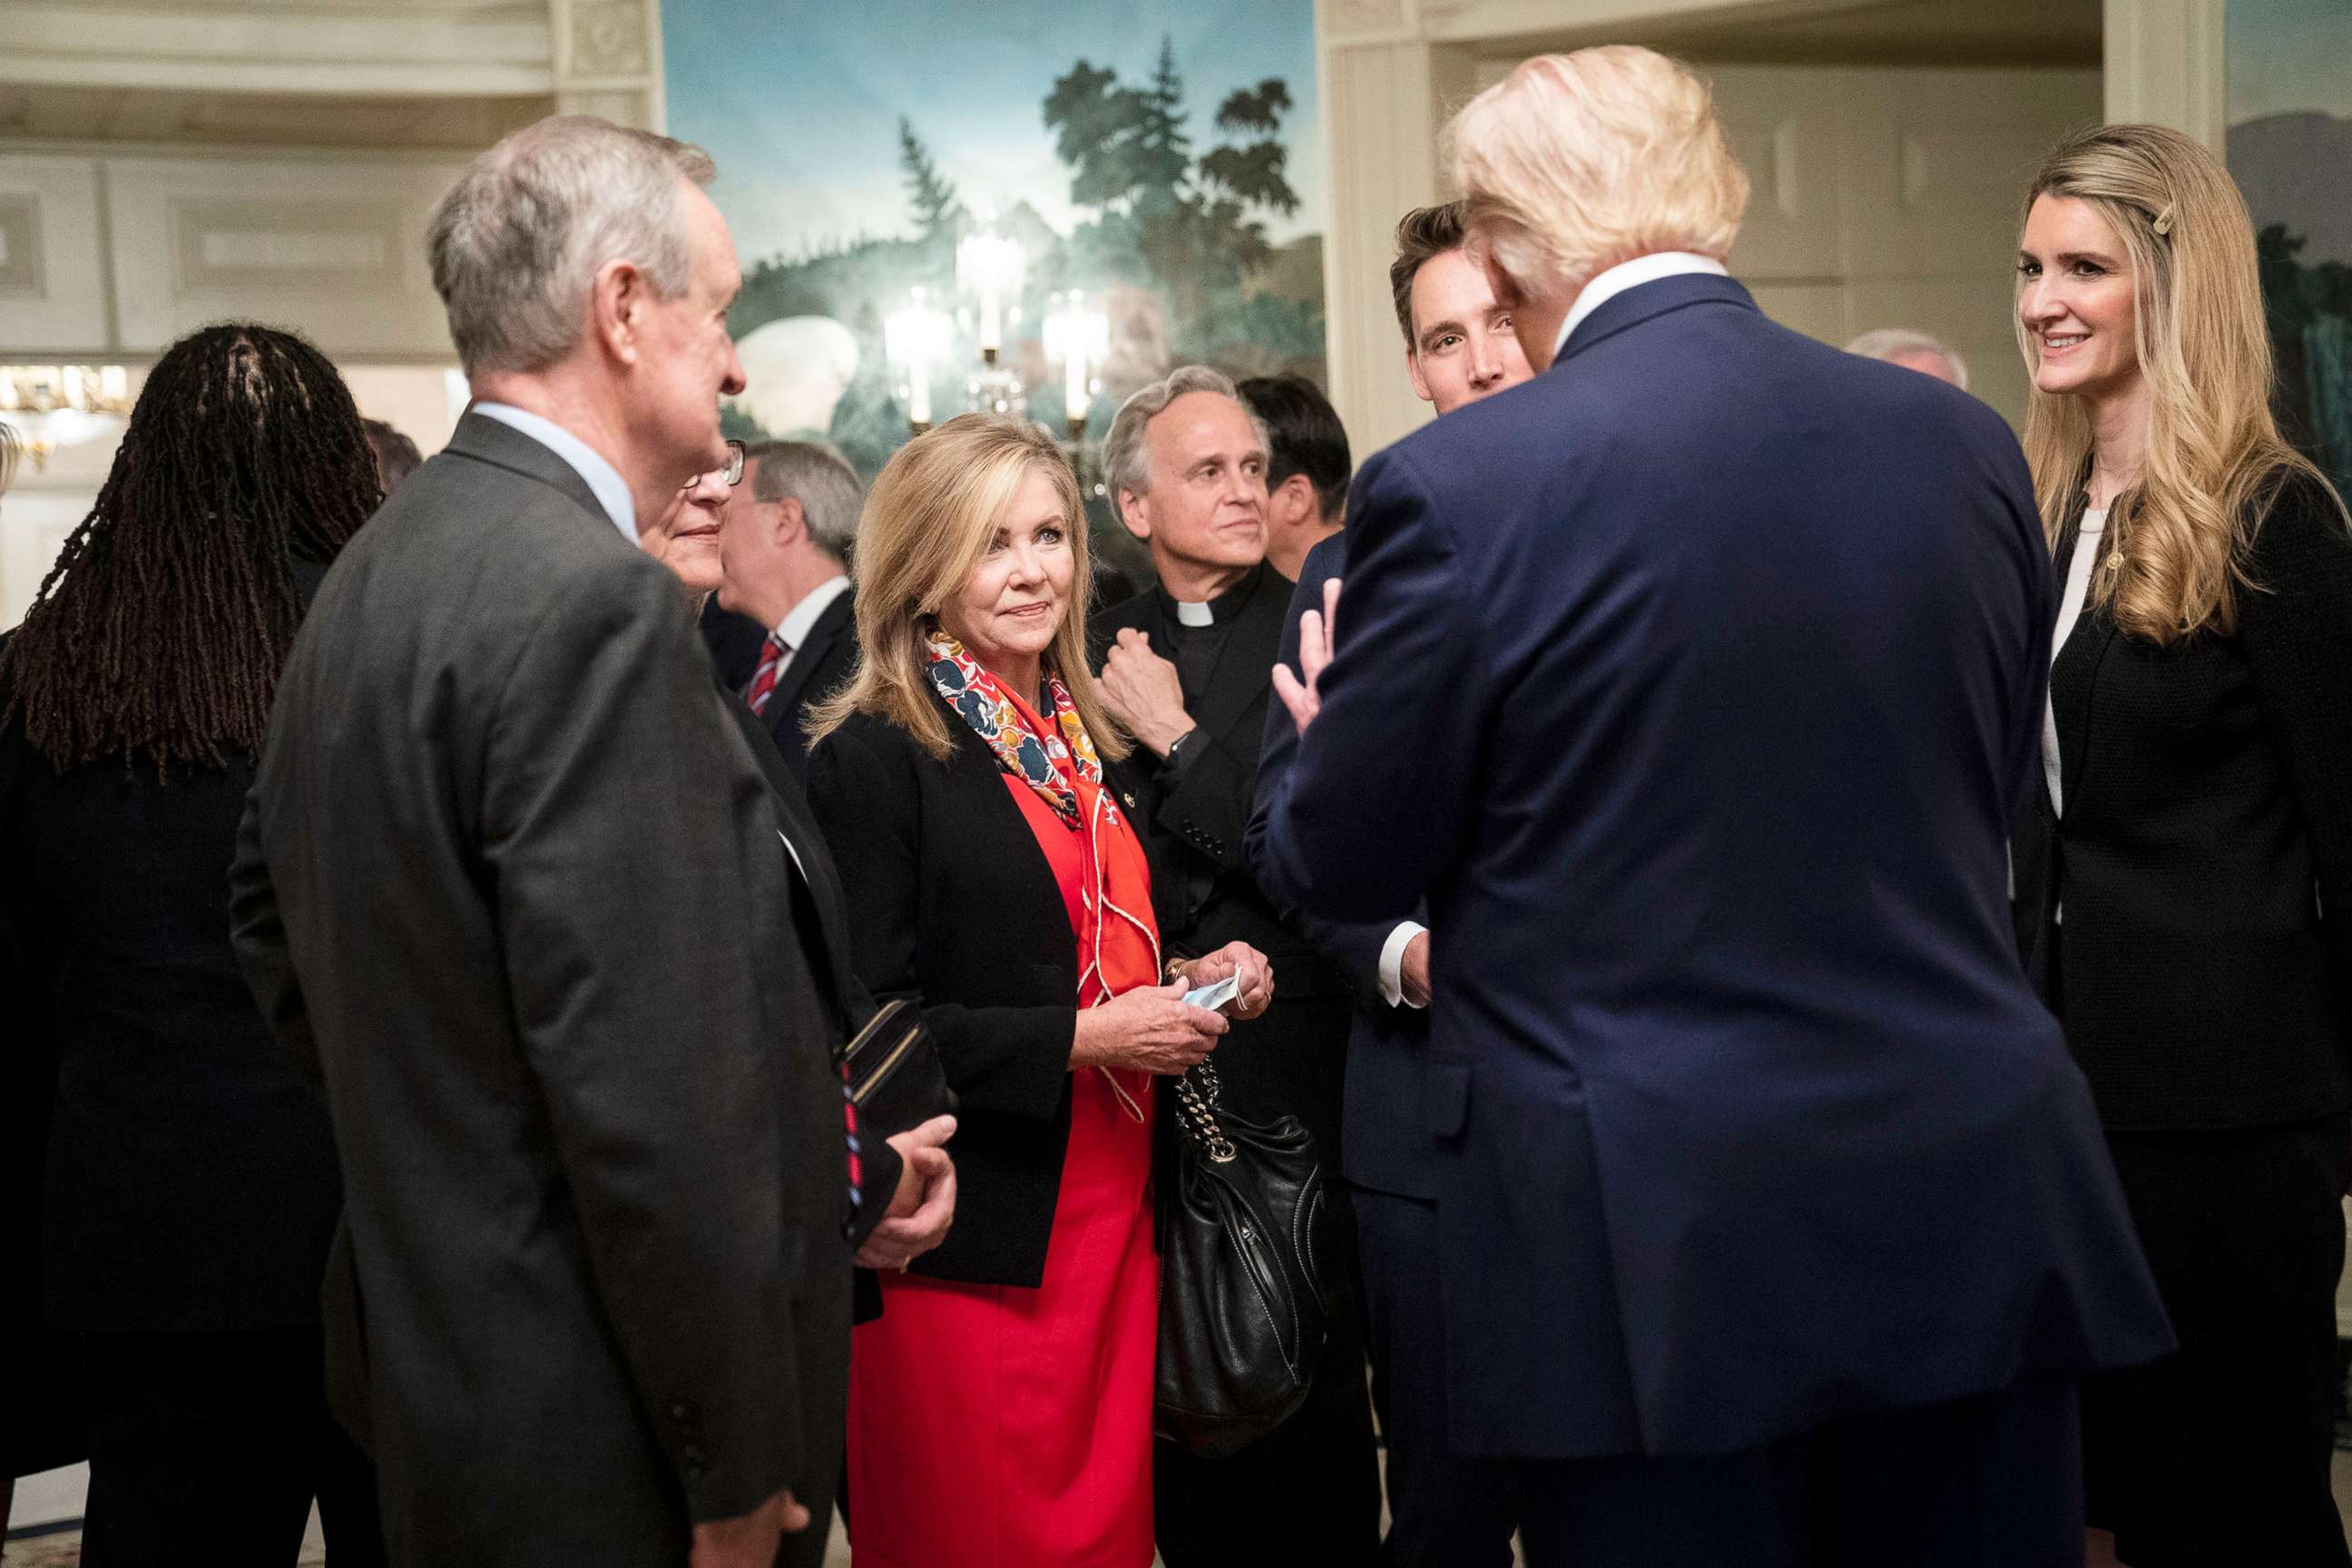 PHOTO: Rev. John Jenkins, the president of the University of Notre Dame, center, attends a reception for Supreme Court nominee Judge Amy Coney Barrett at the White House,Sept. 26, 2020.